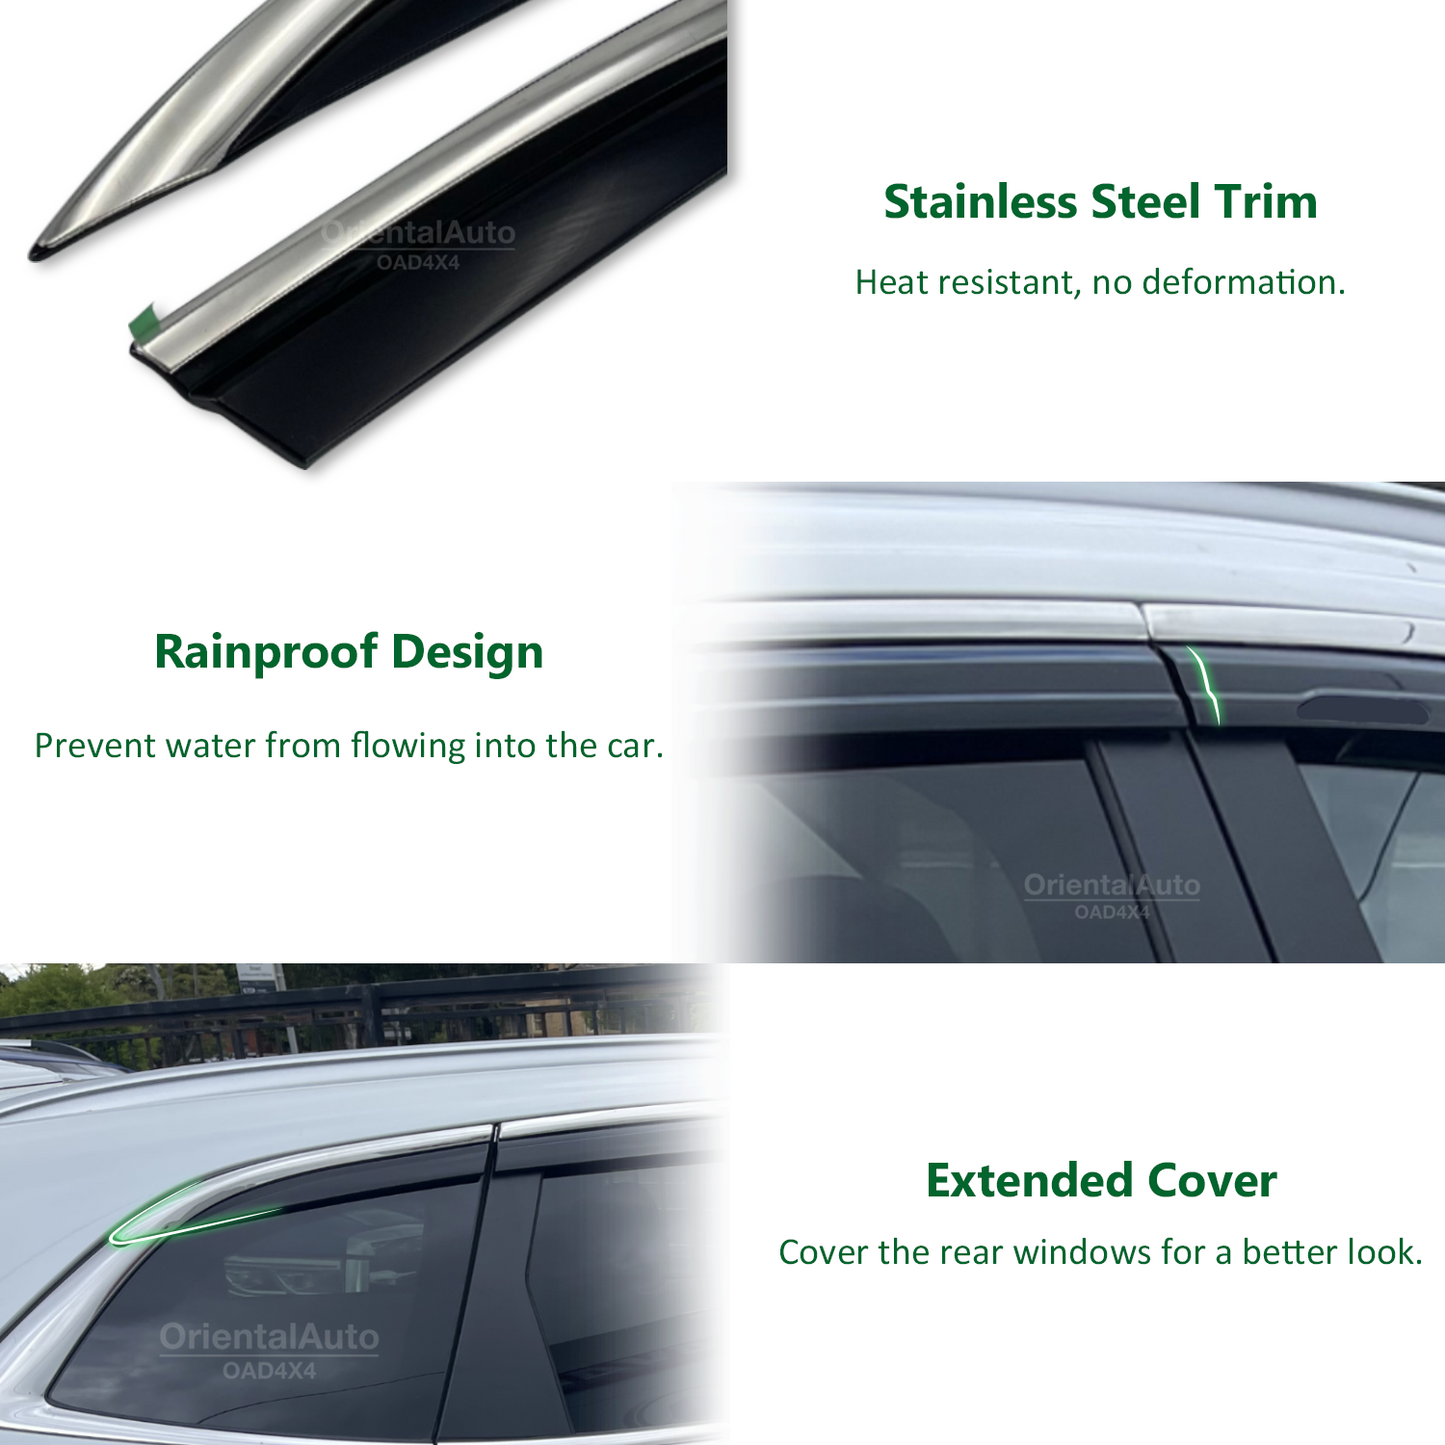 Injection 6pcs Stainless Weathershields For Mitsubishi Outlander ZM Series 2021+ Weather Shields Window Visor